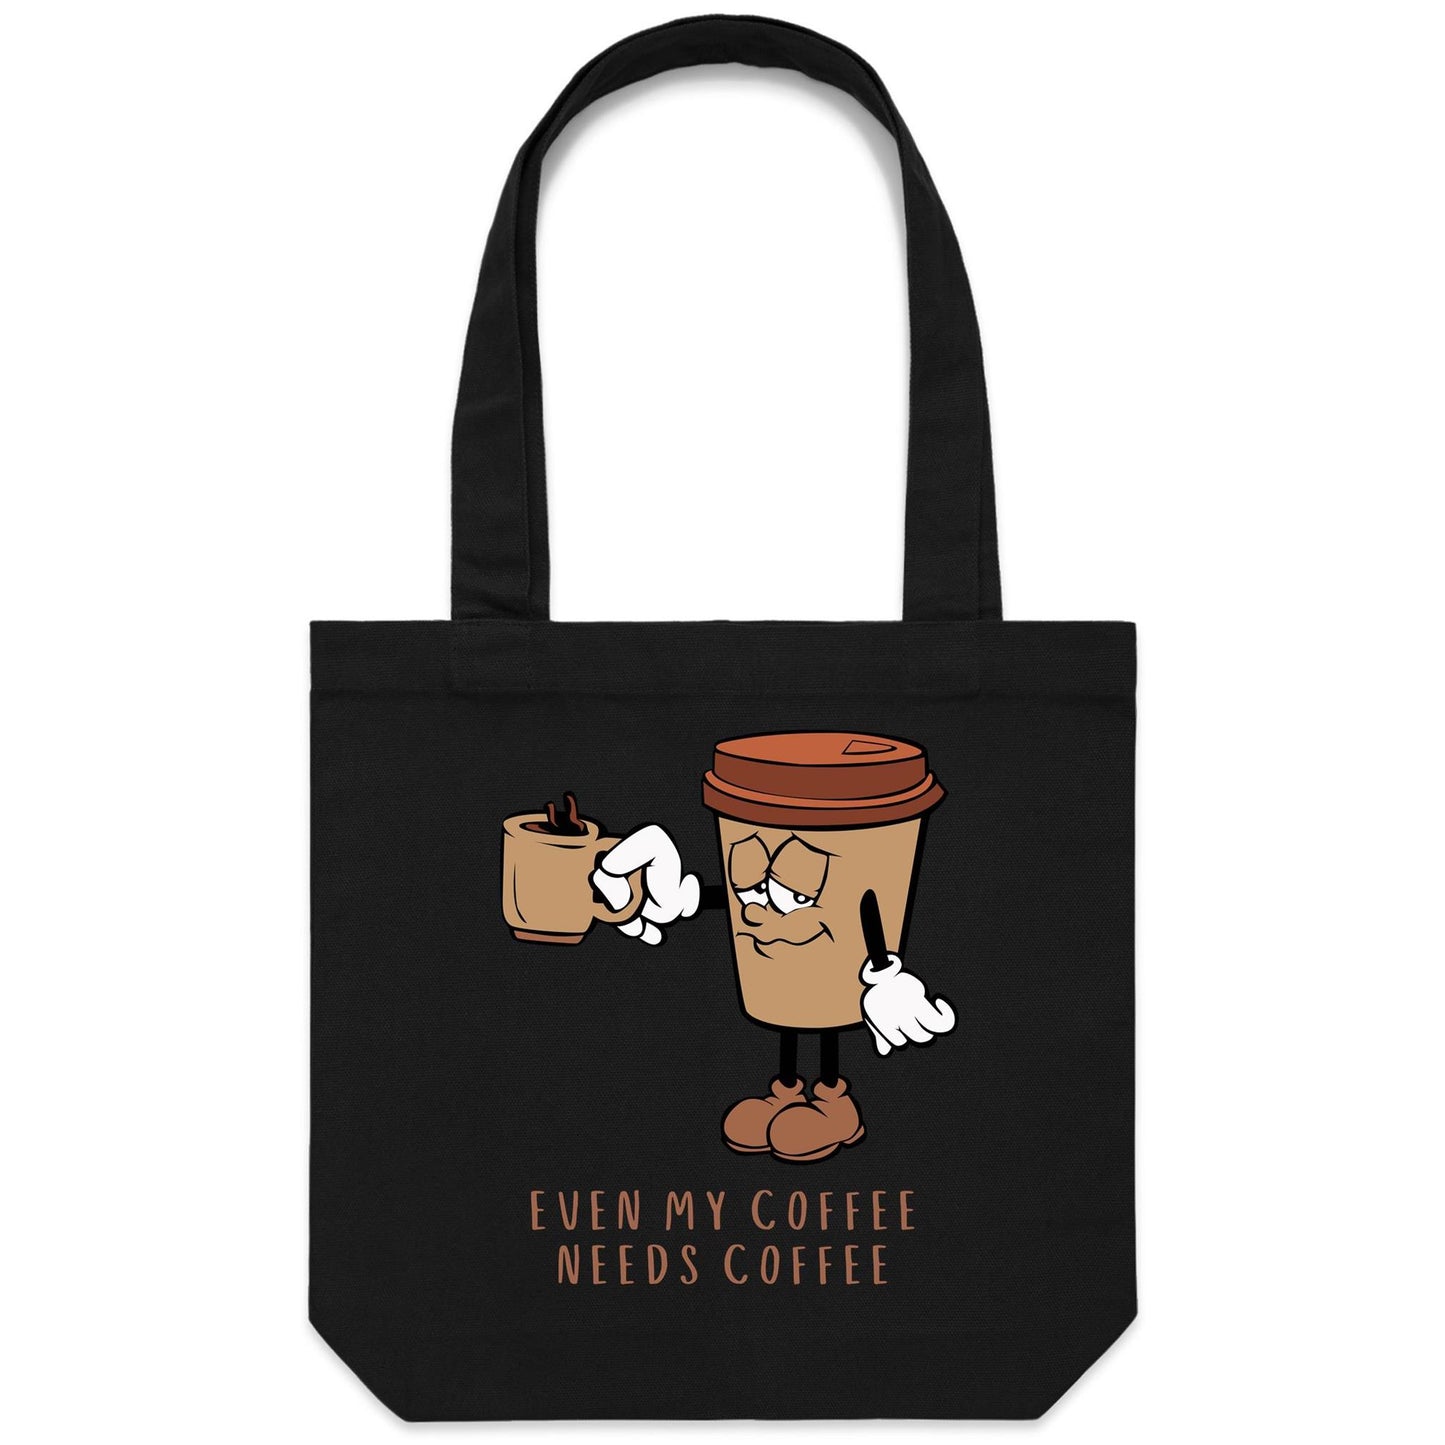 Even My Coffee Needs Coffee - Canvas Tote Bag Black One Size Tote Bag Coffee